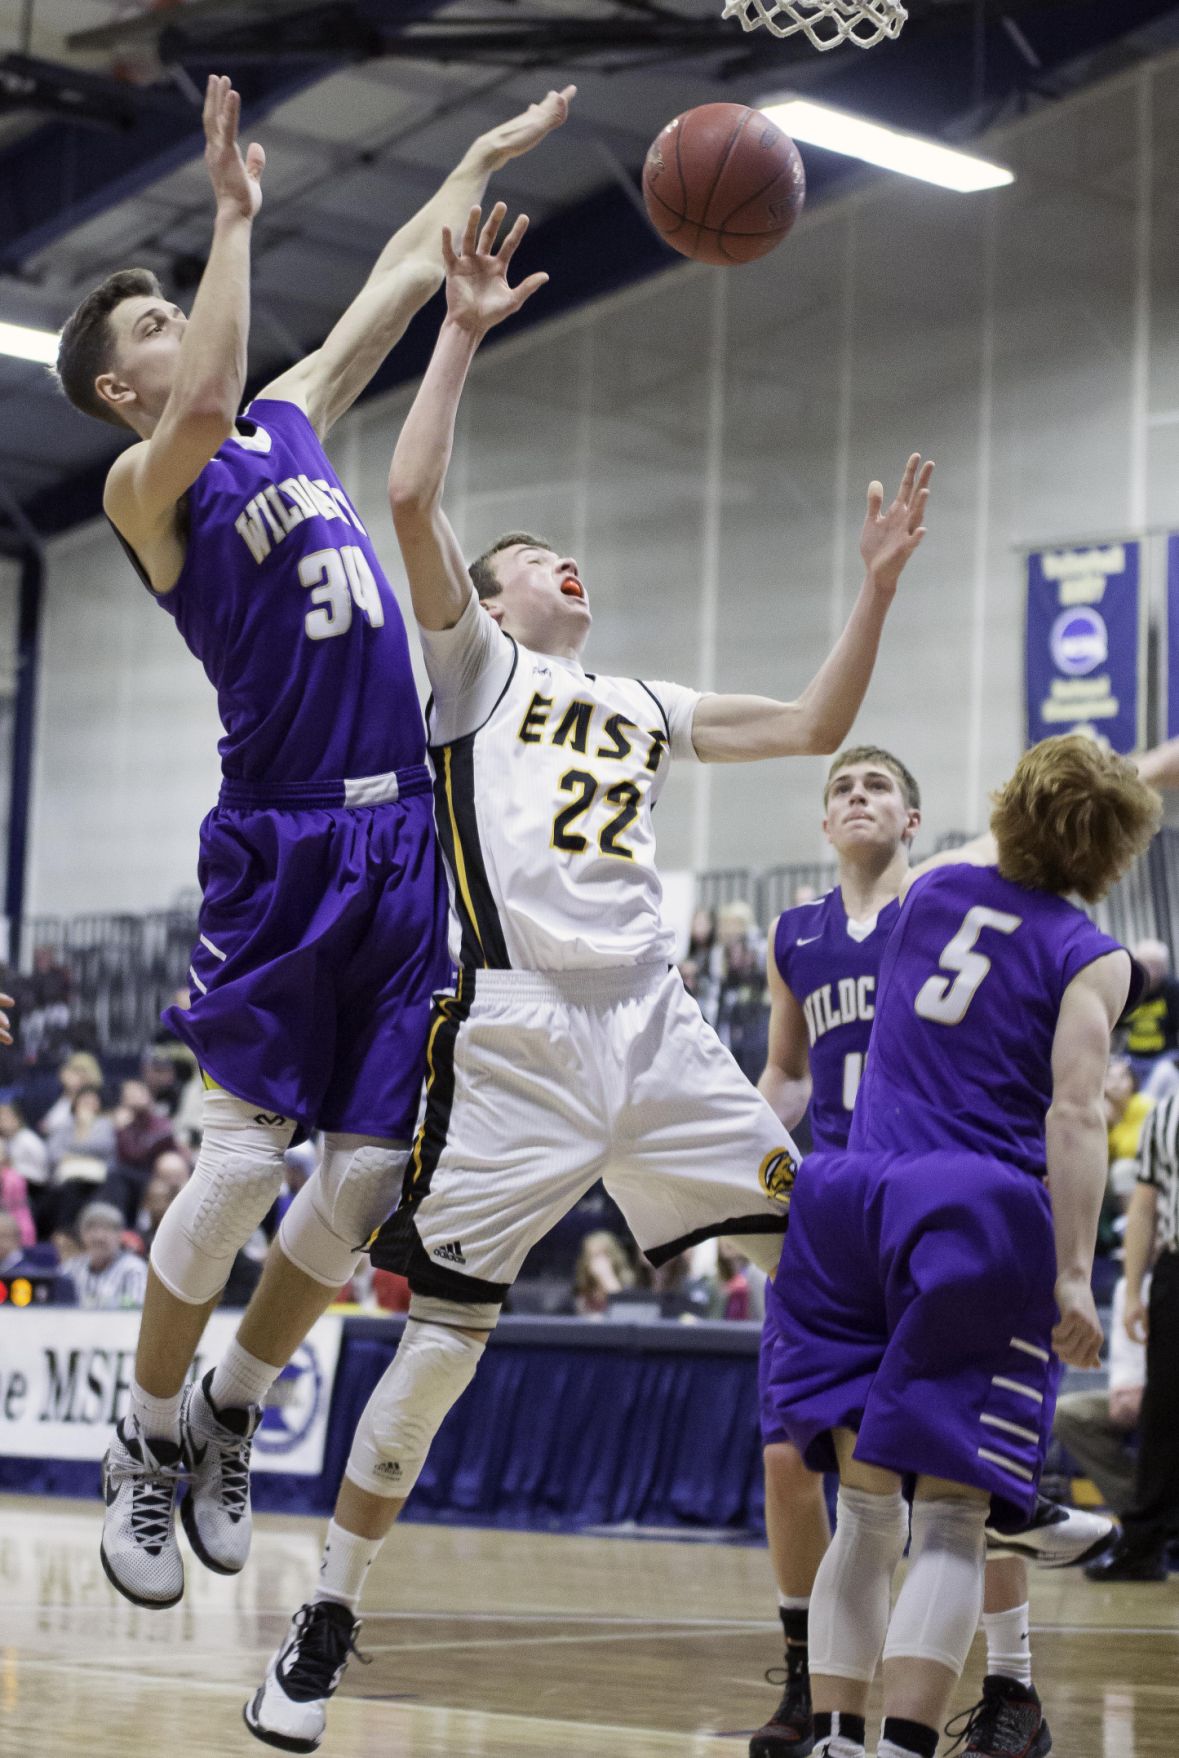 Taller Waconia takes out East in third-place game | Sports ...